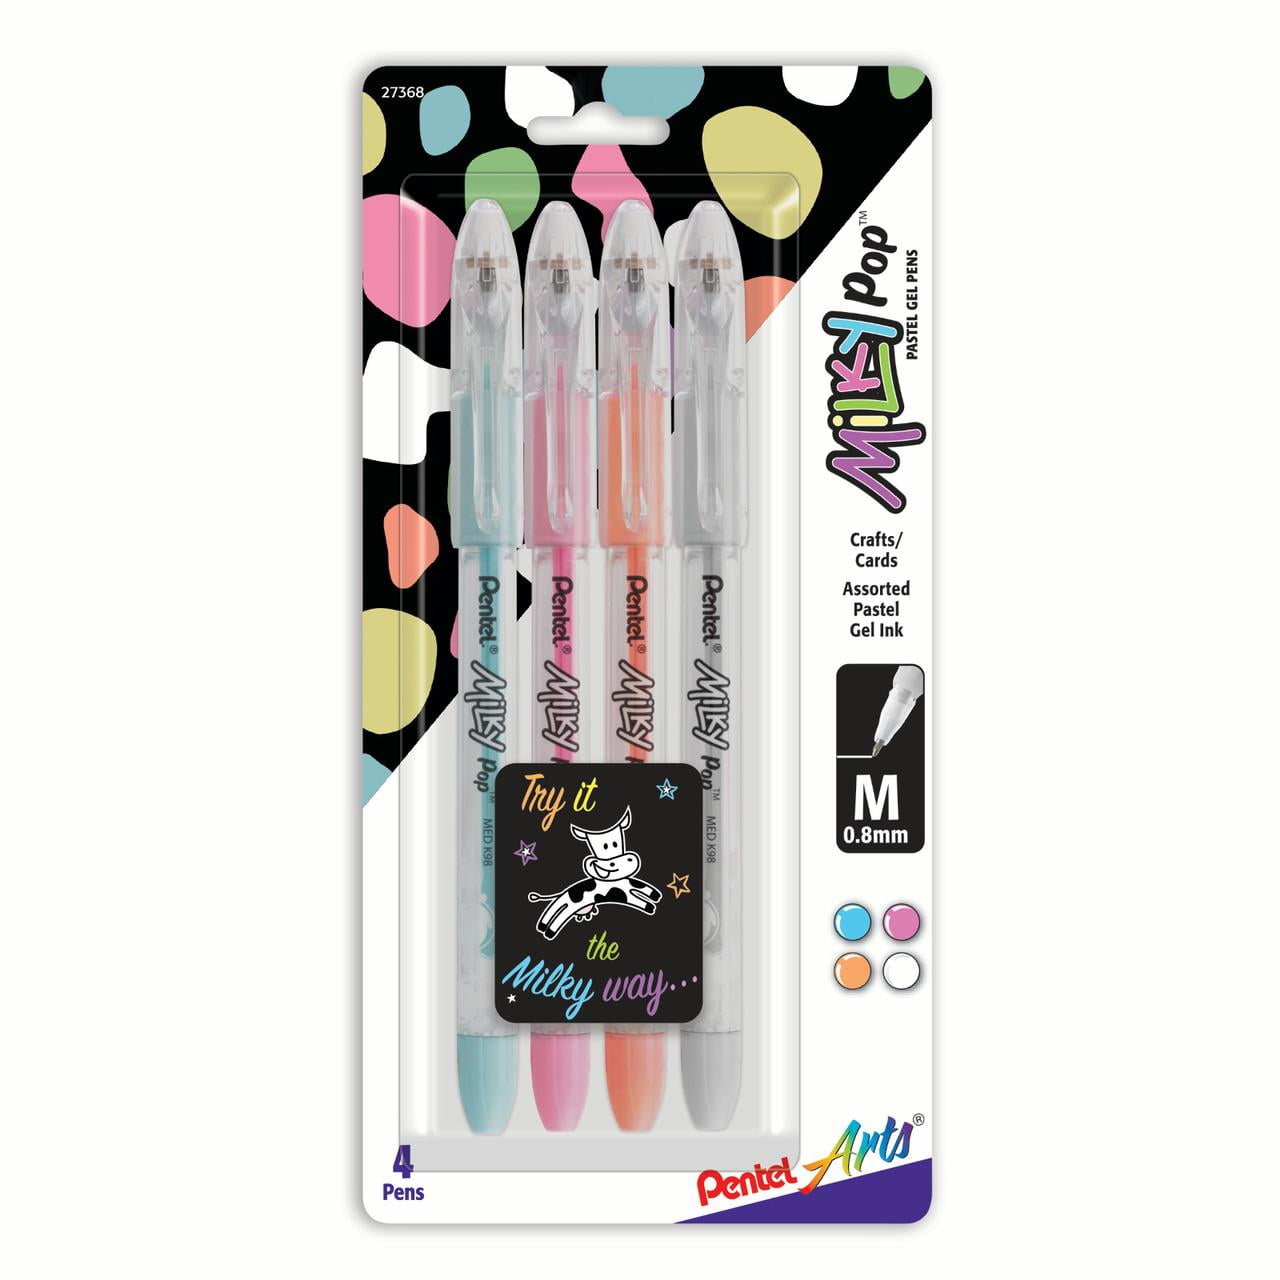 Smudge-resistant White Gel Pen 0.7mm Fine Point for Artists, Art Drawing,  Sketching & Writing (3pack) - White Ink Pen Highlight Fineliner - Archival